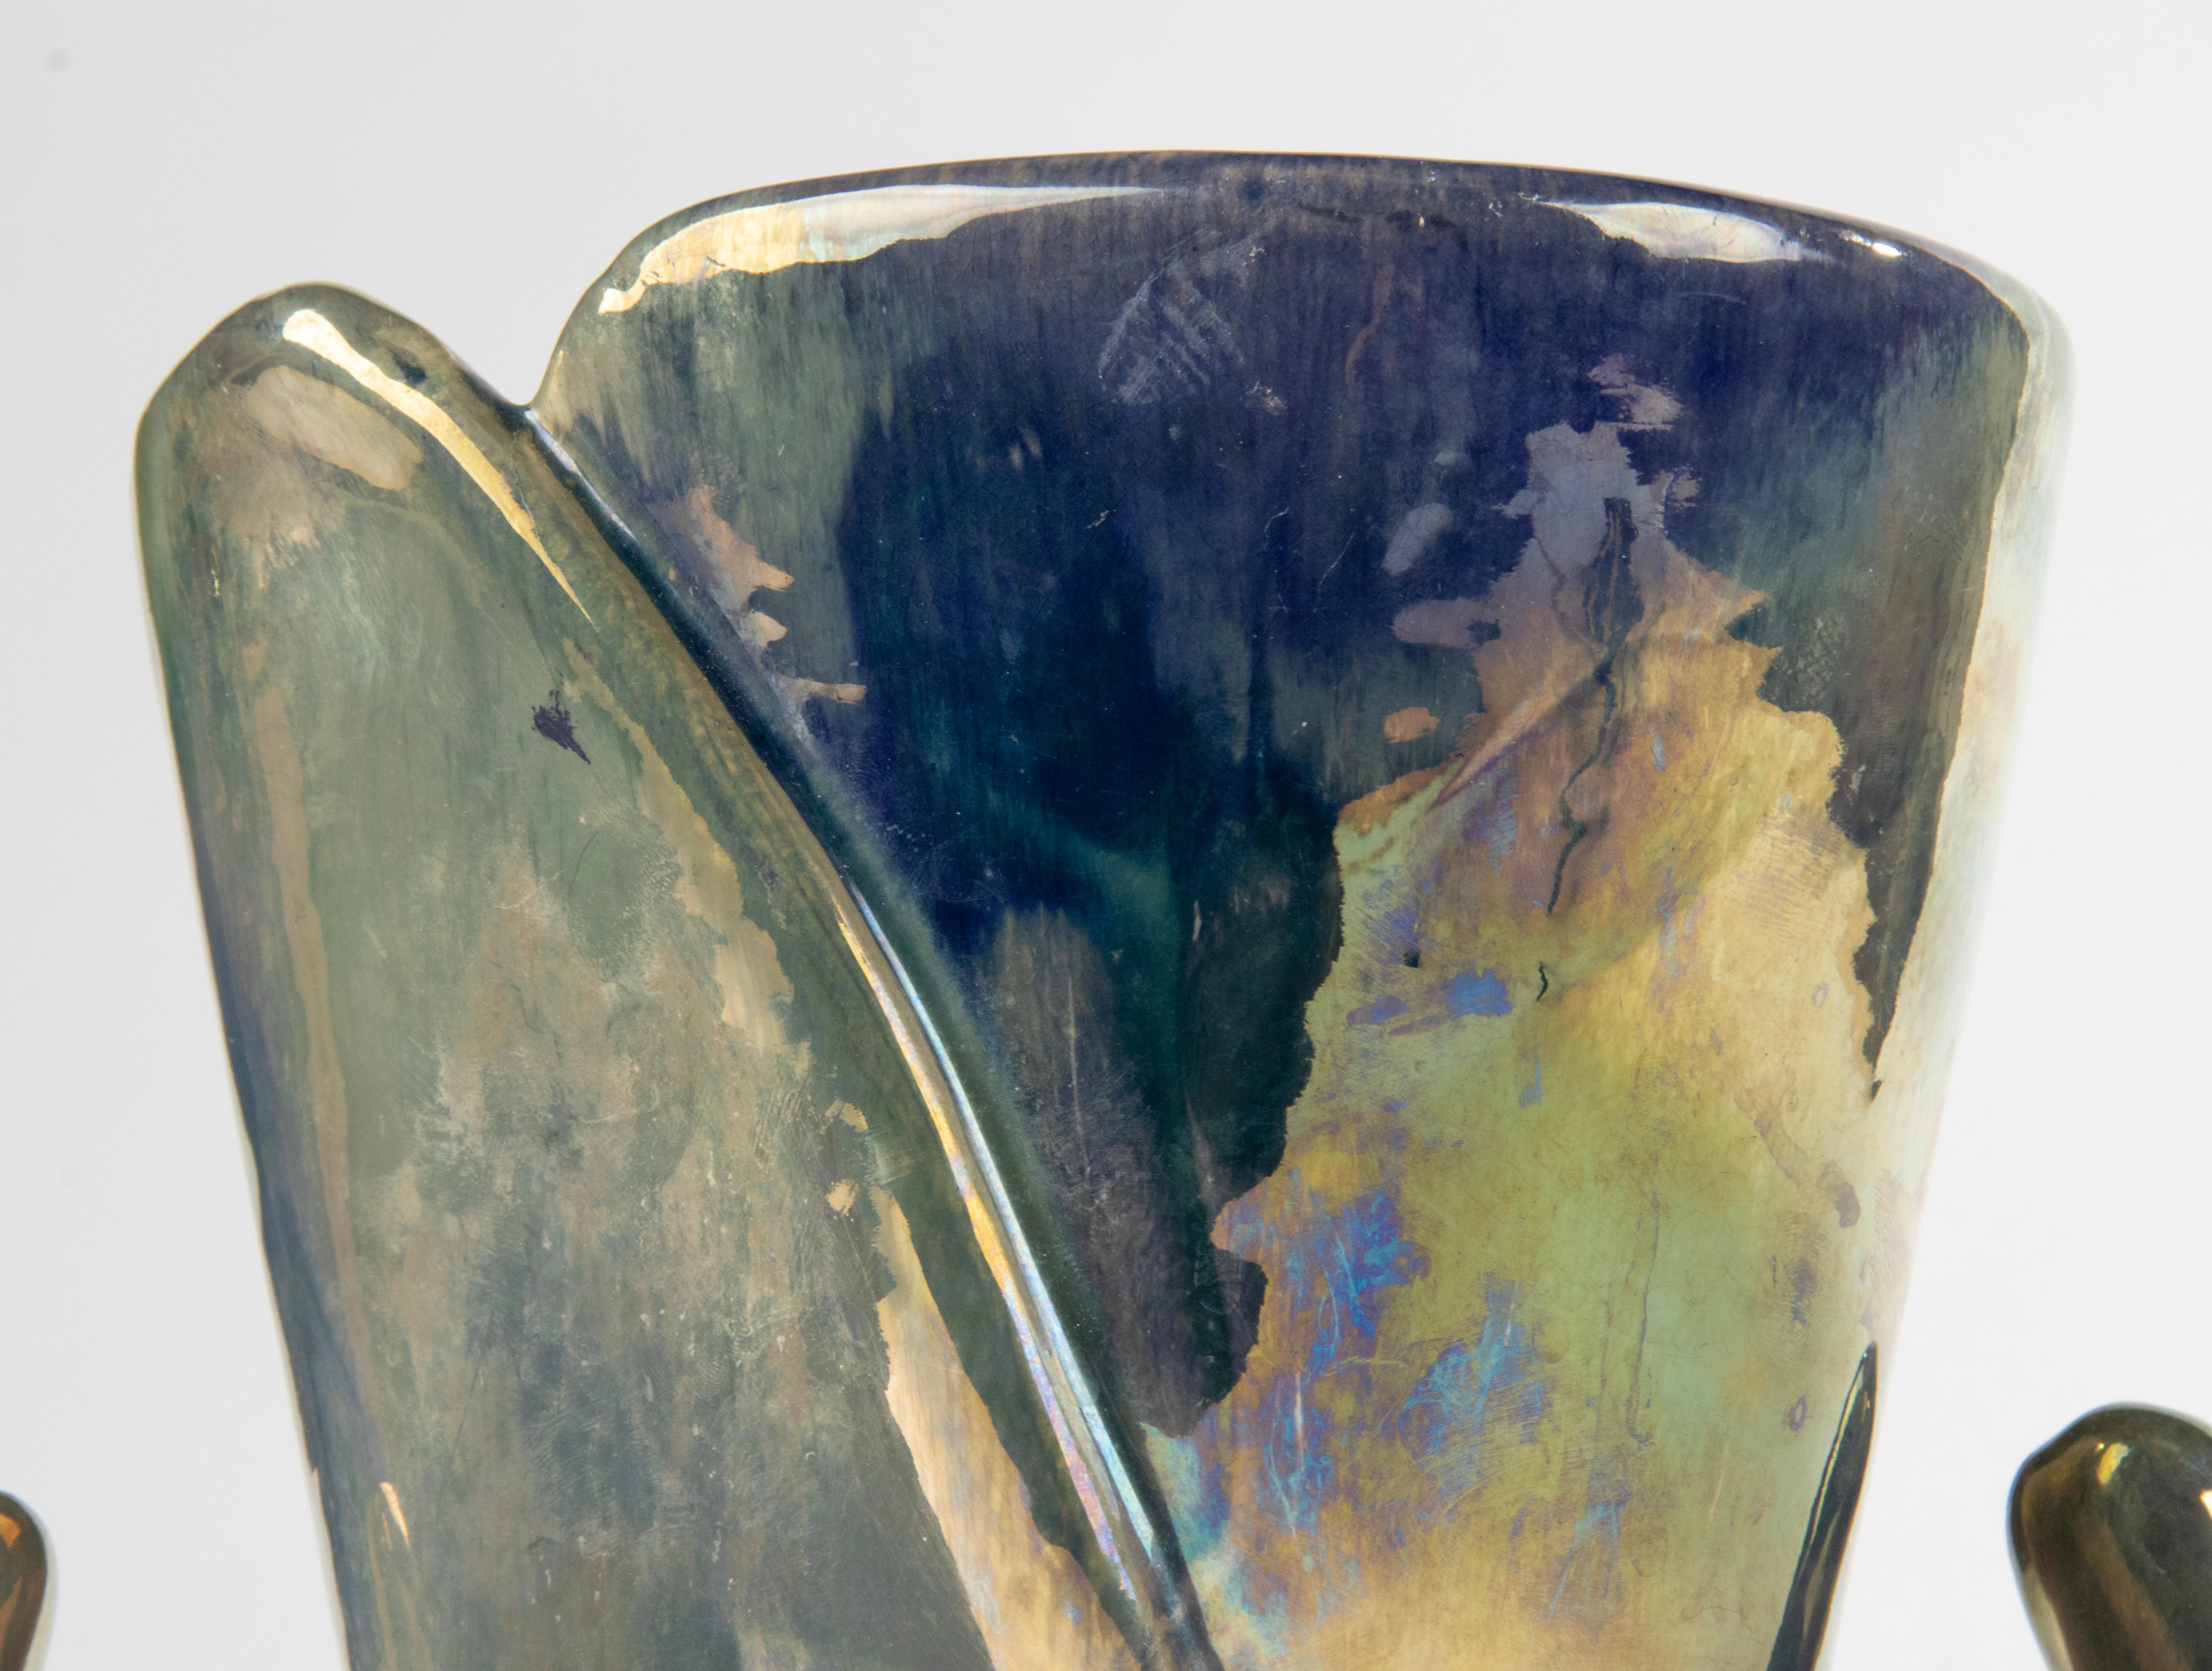 1930s Ceramic Art Deco Vase with Iridescent Glaze - Rambervilliers France For Sale 1